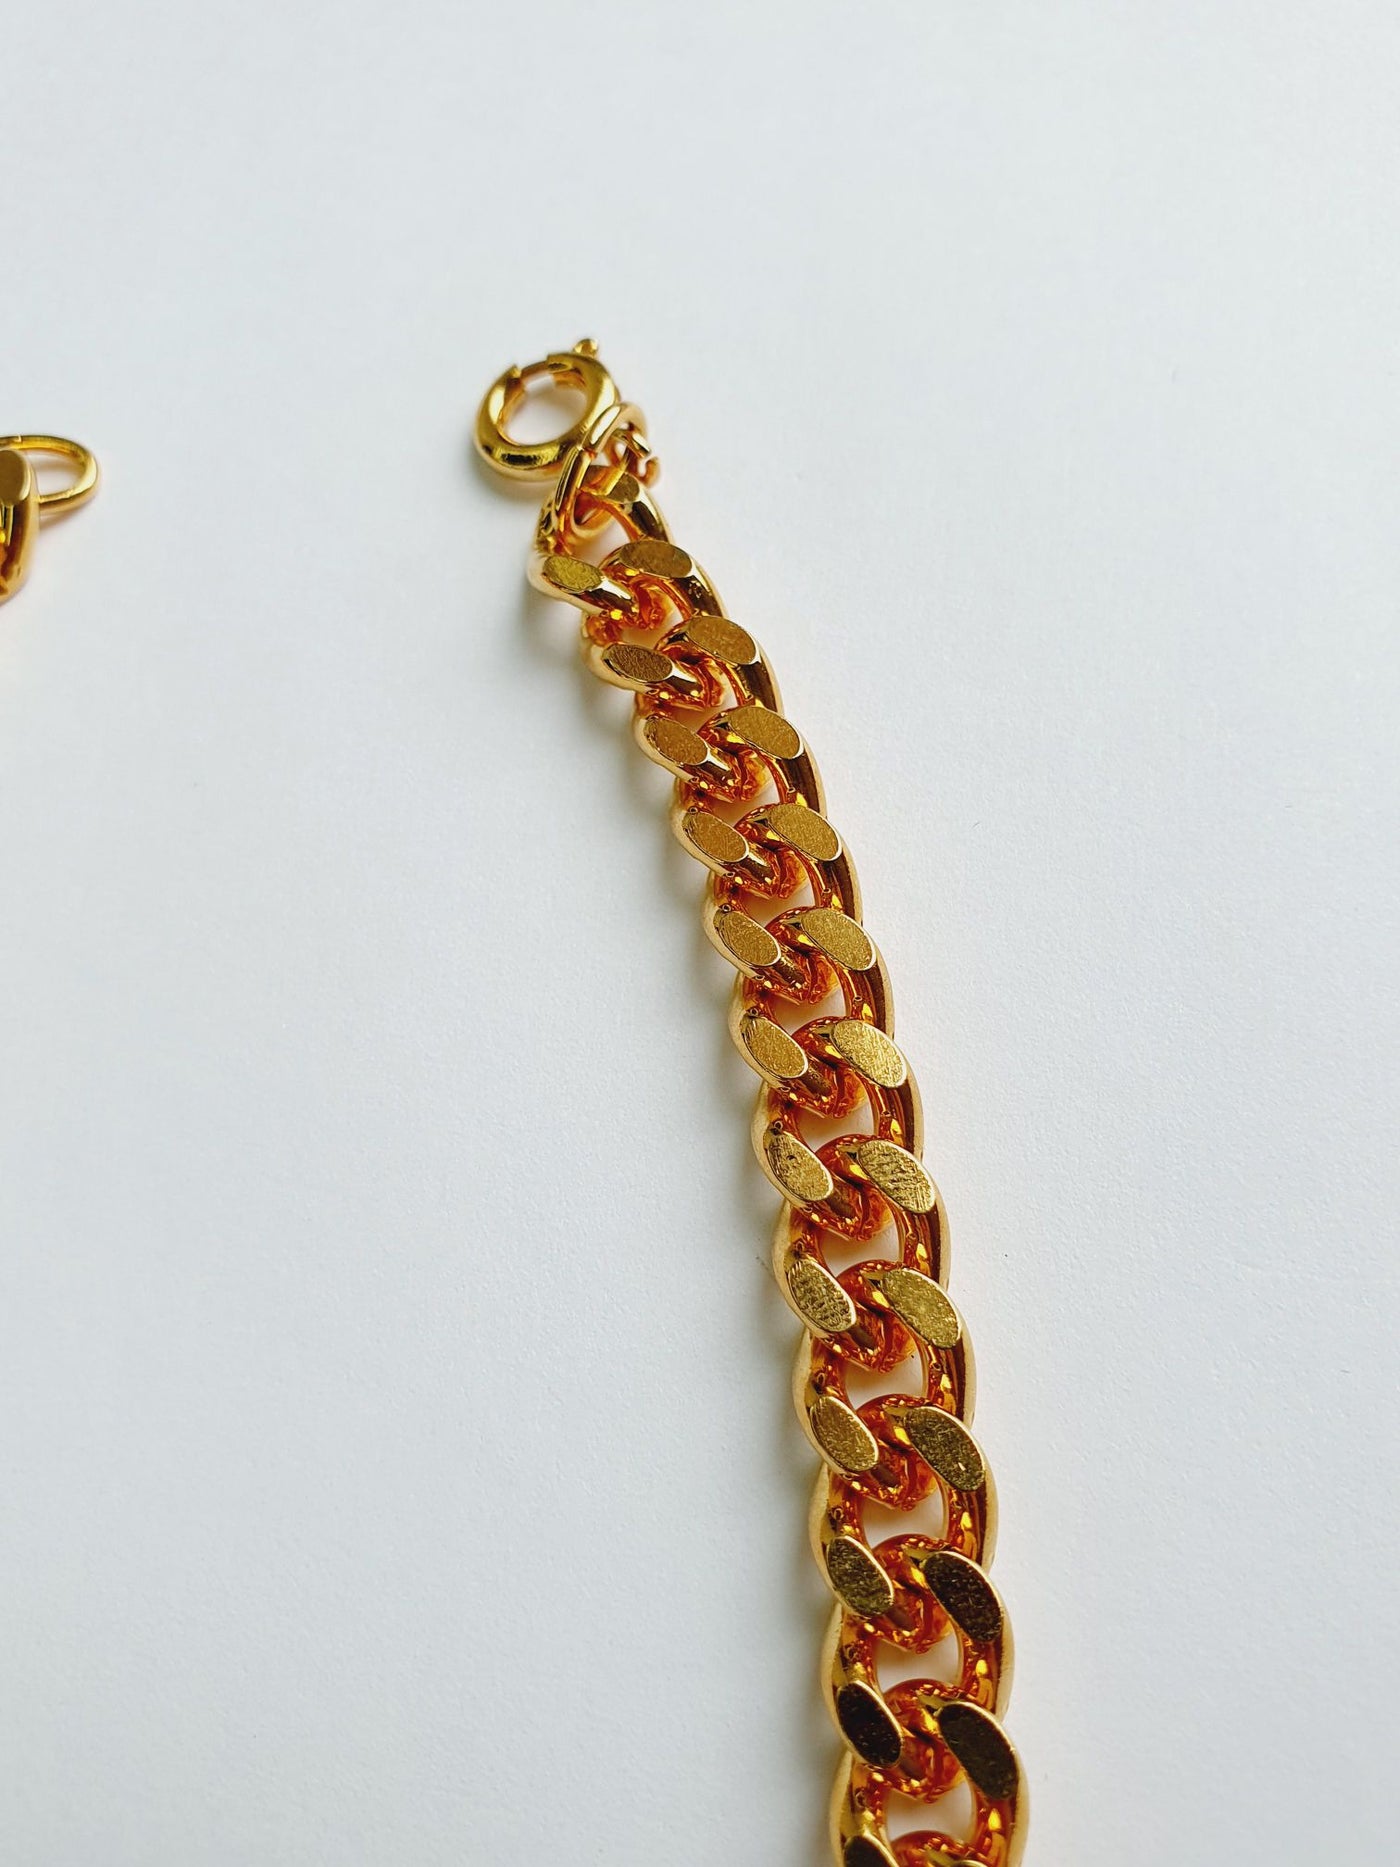 Vintage Gold Plated Thick Curb Chain Necklace